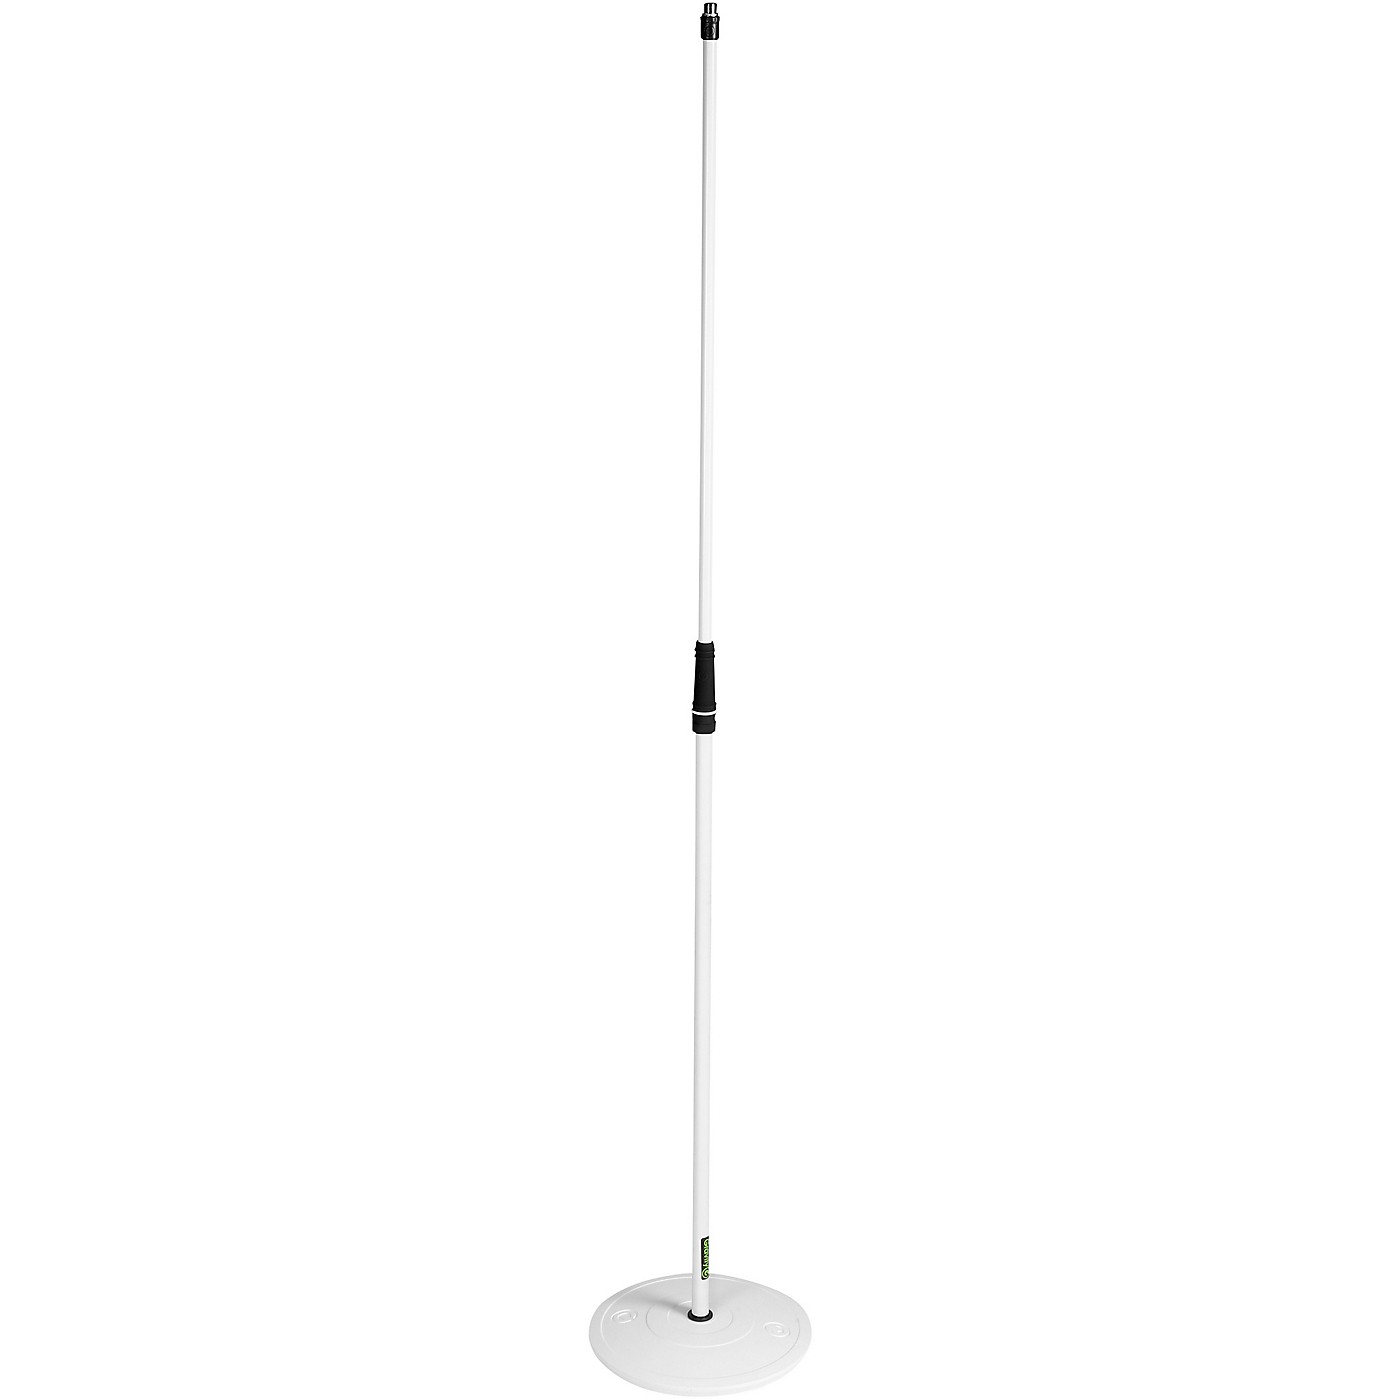 Gravity Stands Microphone Stand With Round Base - White thumbnail